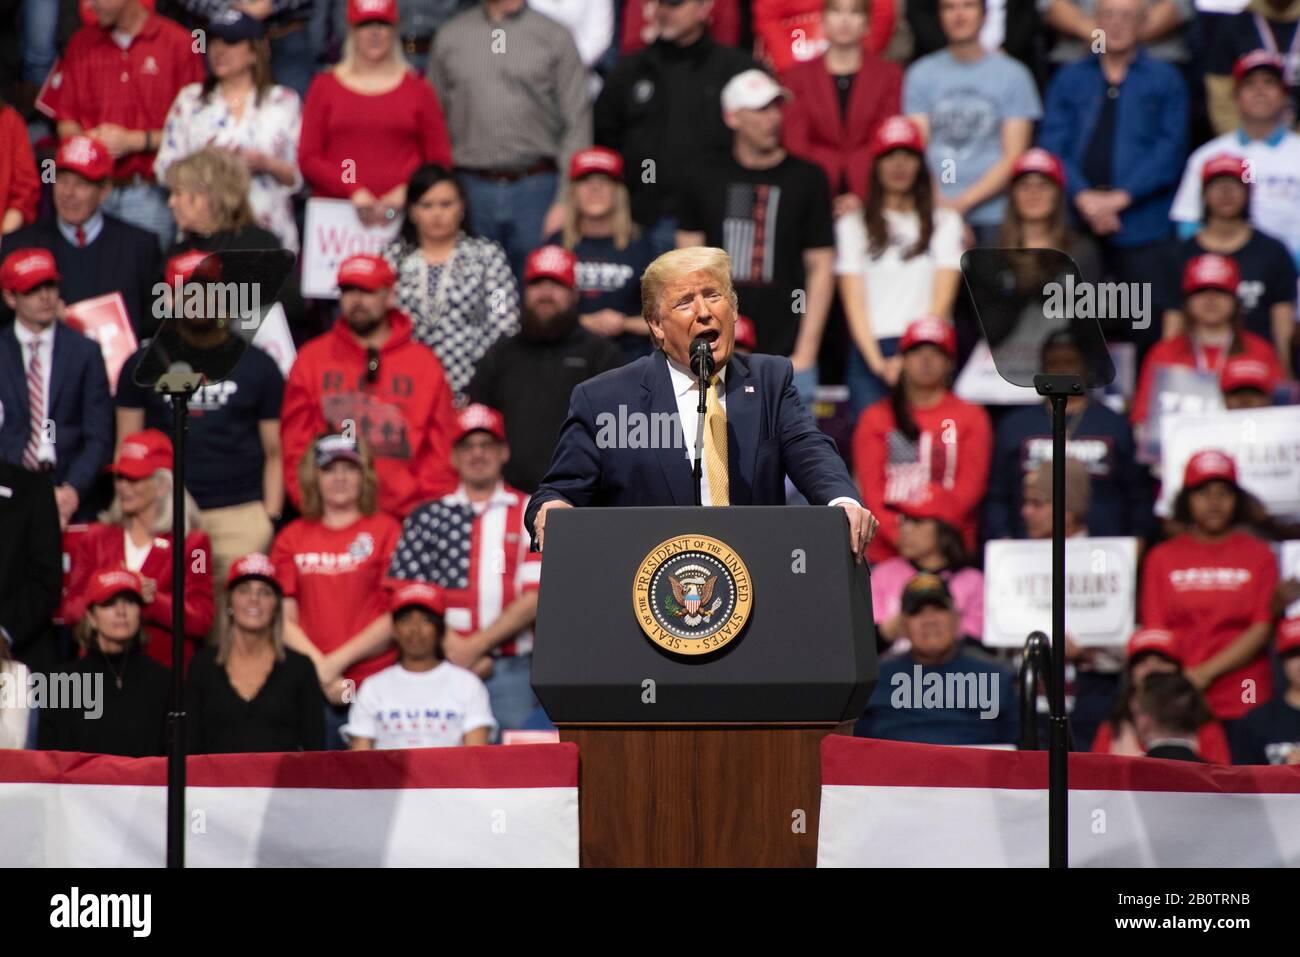 Colorado Springs, United States. 20th Feb, 2020. President Donald Trump arrives at Trump Keep America Great rally at The Broadmoor World Arena in Colorado Springs, Colorado. Credit: The Photo Access/Alamy Live News Stock Photo